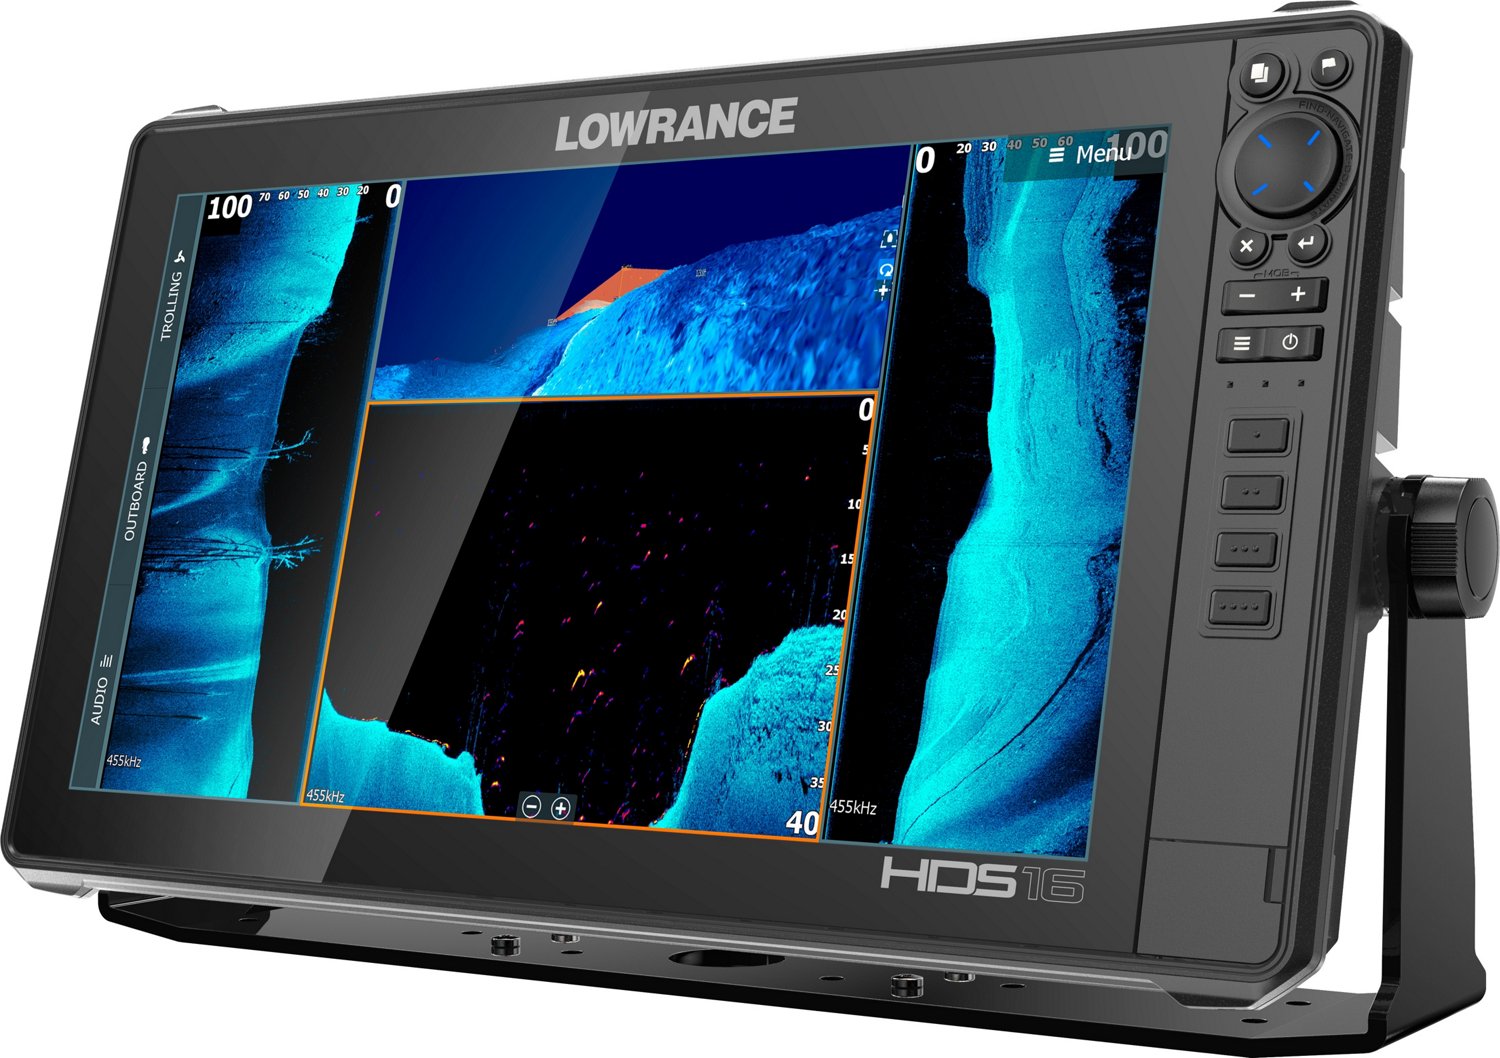 Lowrance HDS LIVE 16 Fish Finder | Free Shipping at Academy